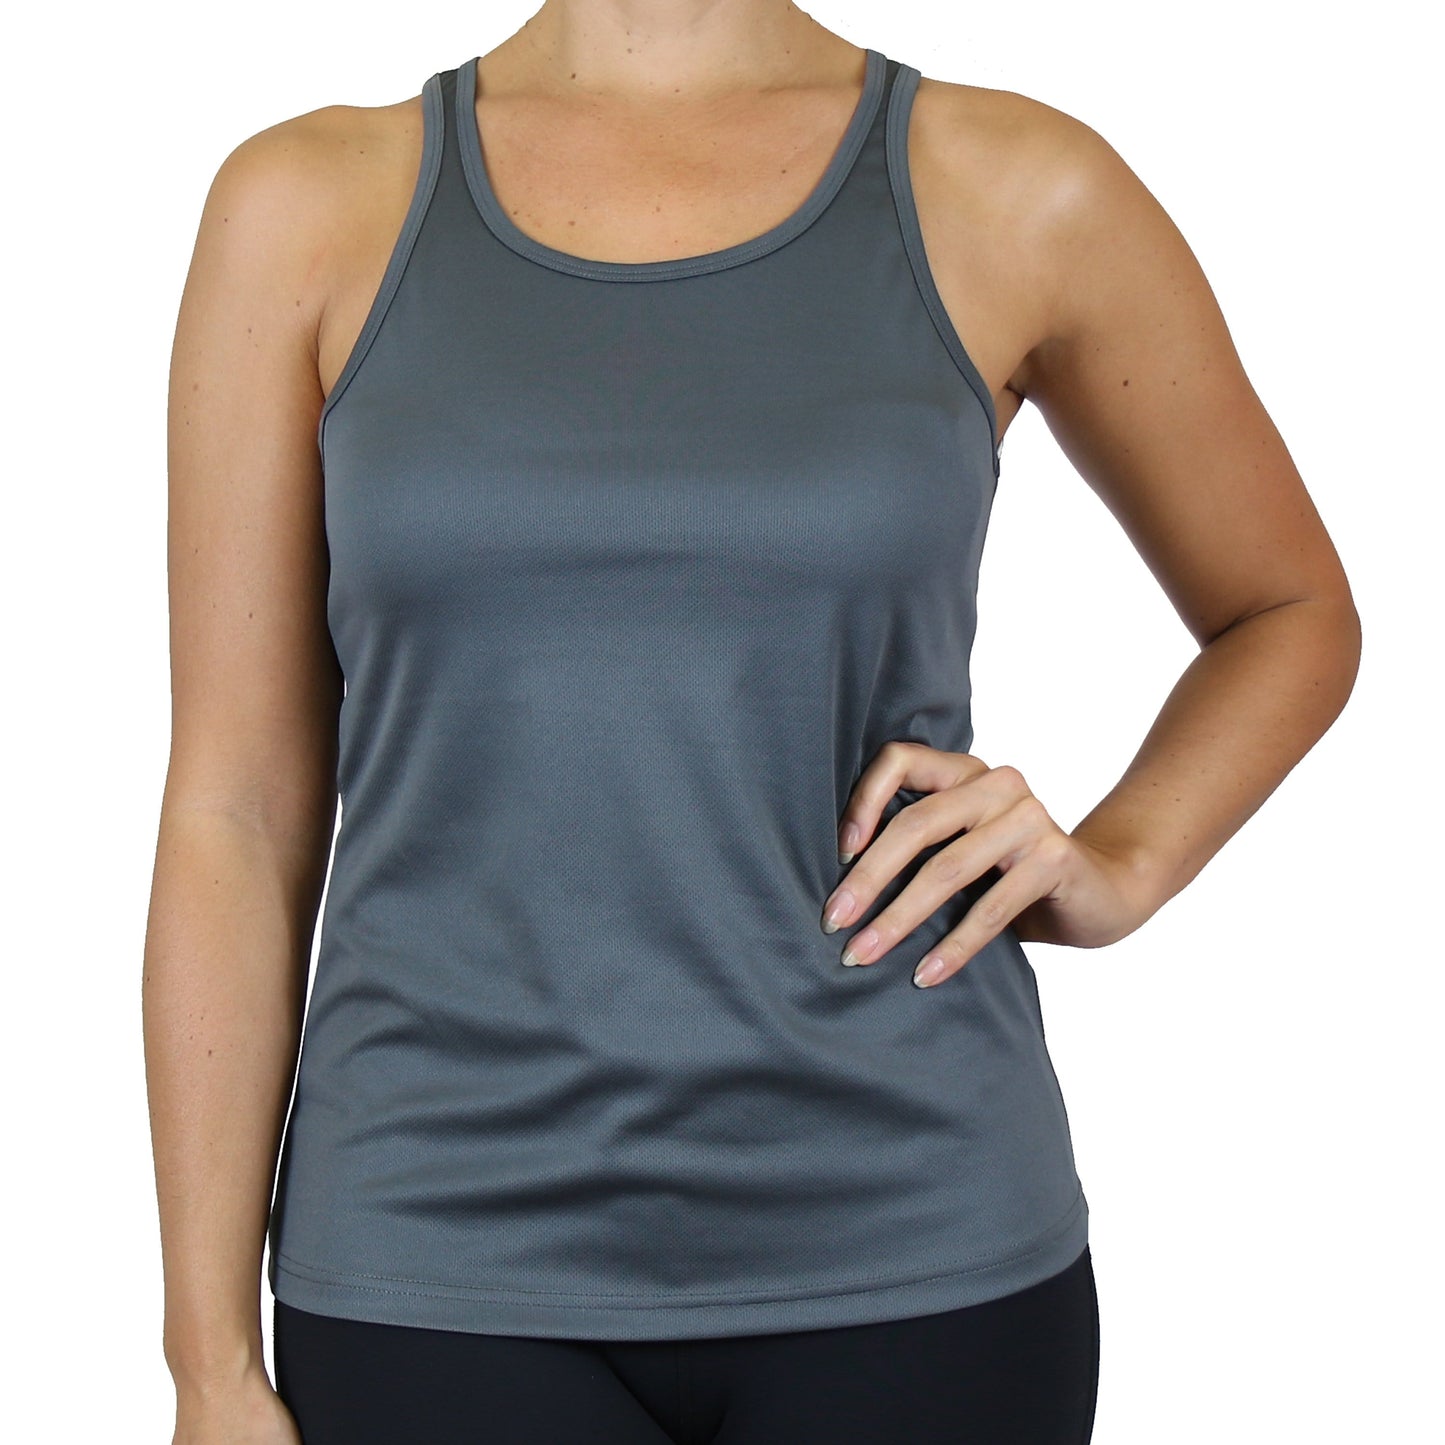 Moisture Wicking Womens Racerback Tanks (S-3XL) - GalaxybyHarvic